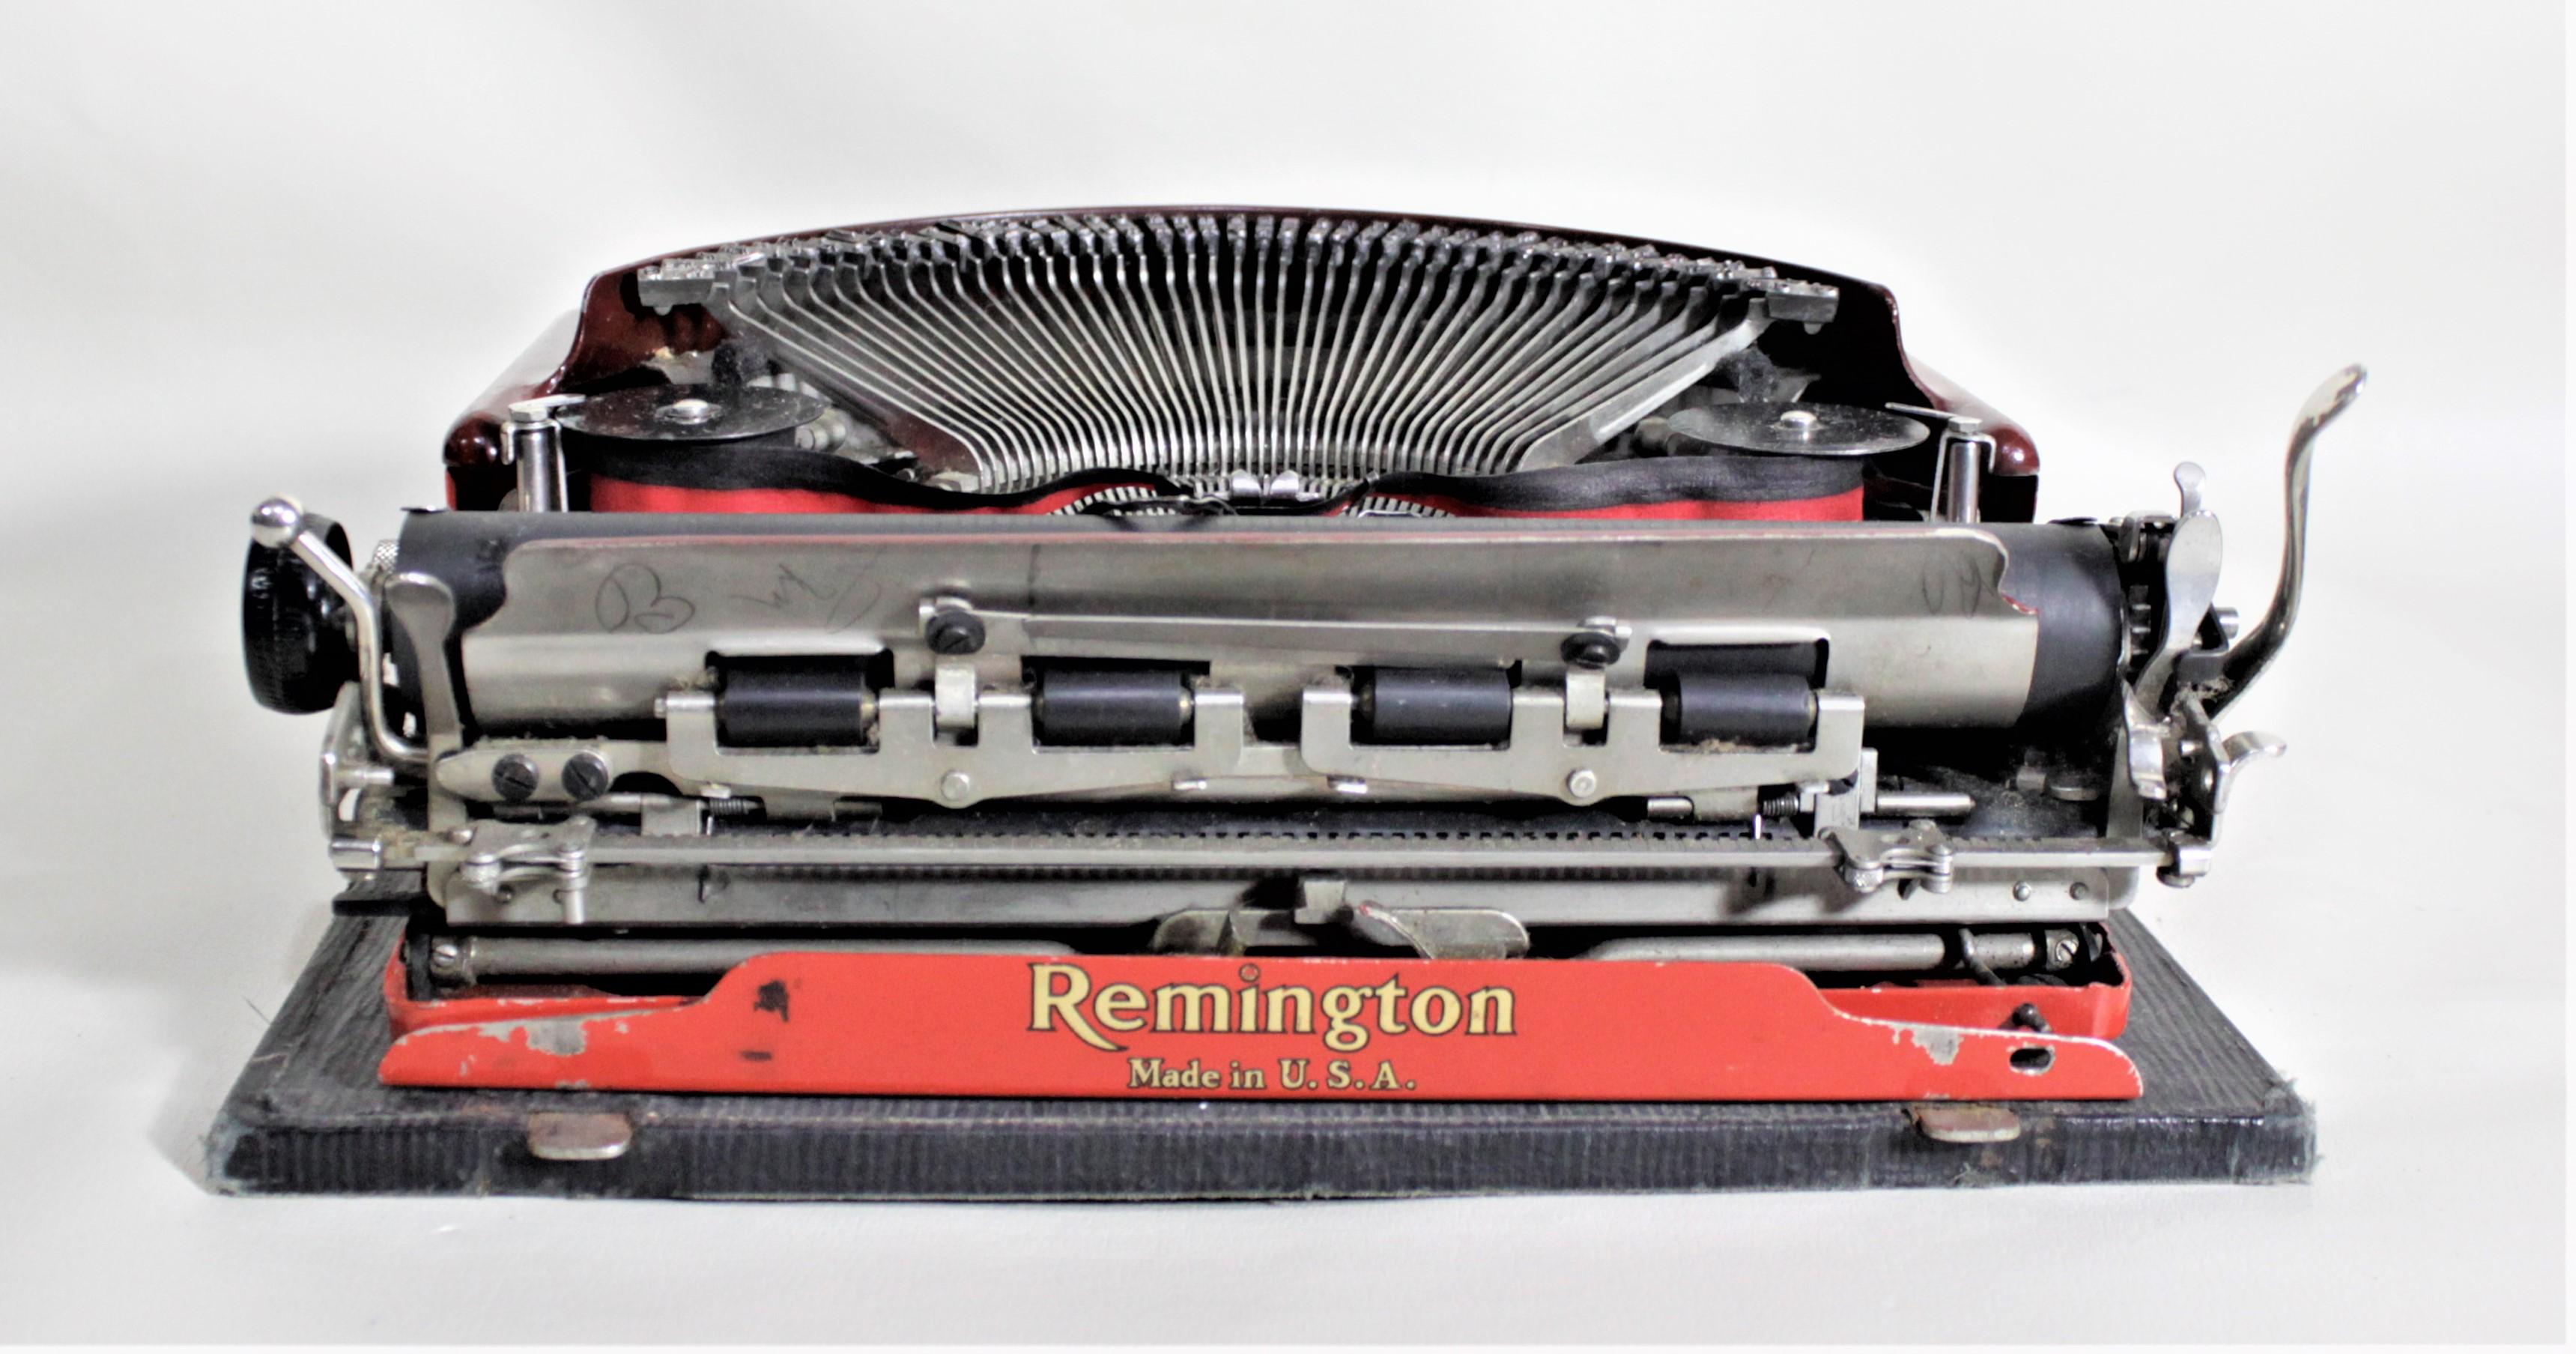 American Art Deco Red Remington Rand No. 3 Streamlined Portable Typewriter with Hard Case